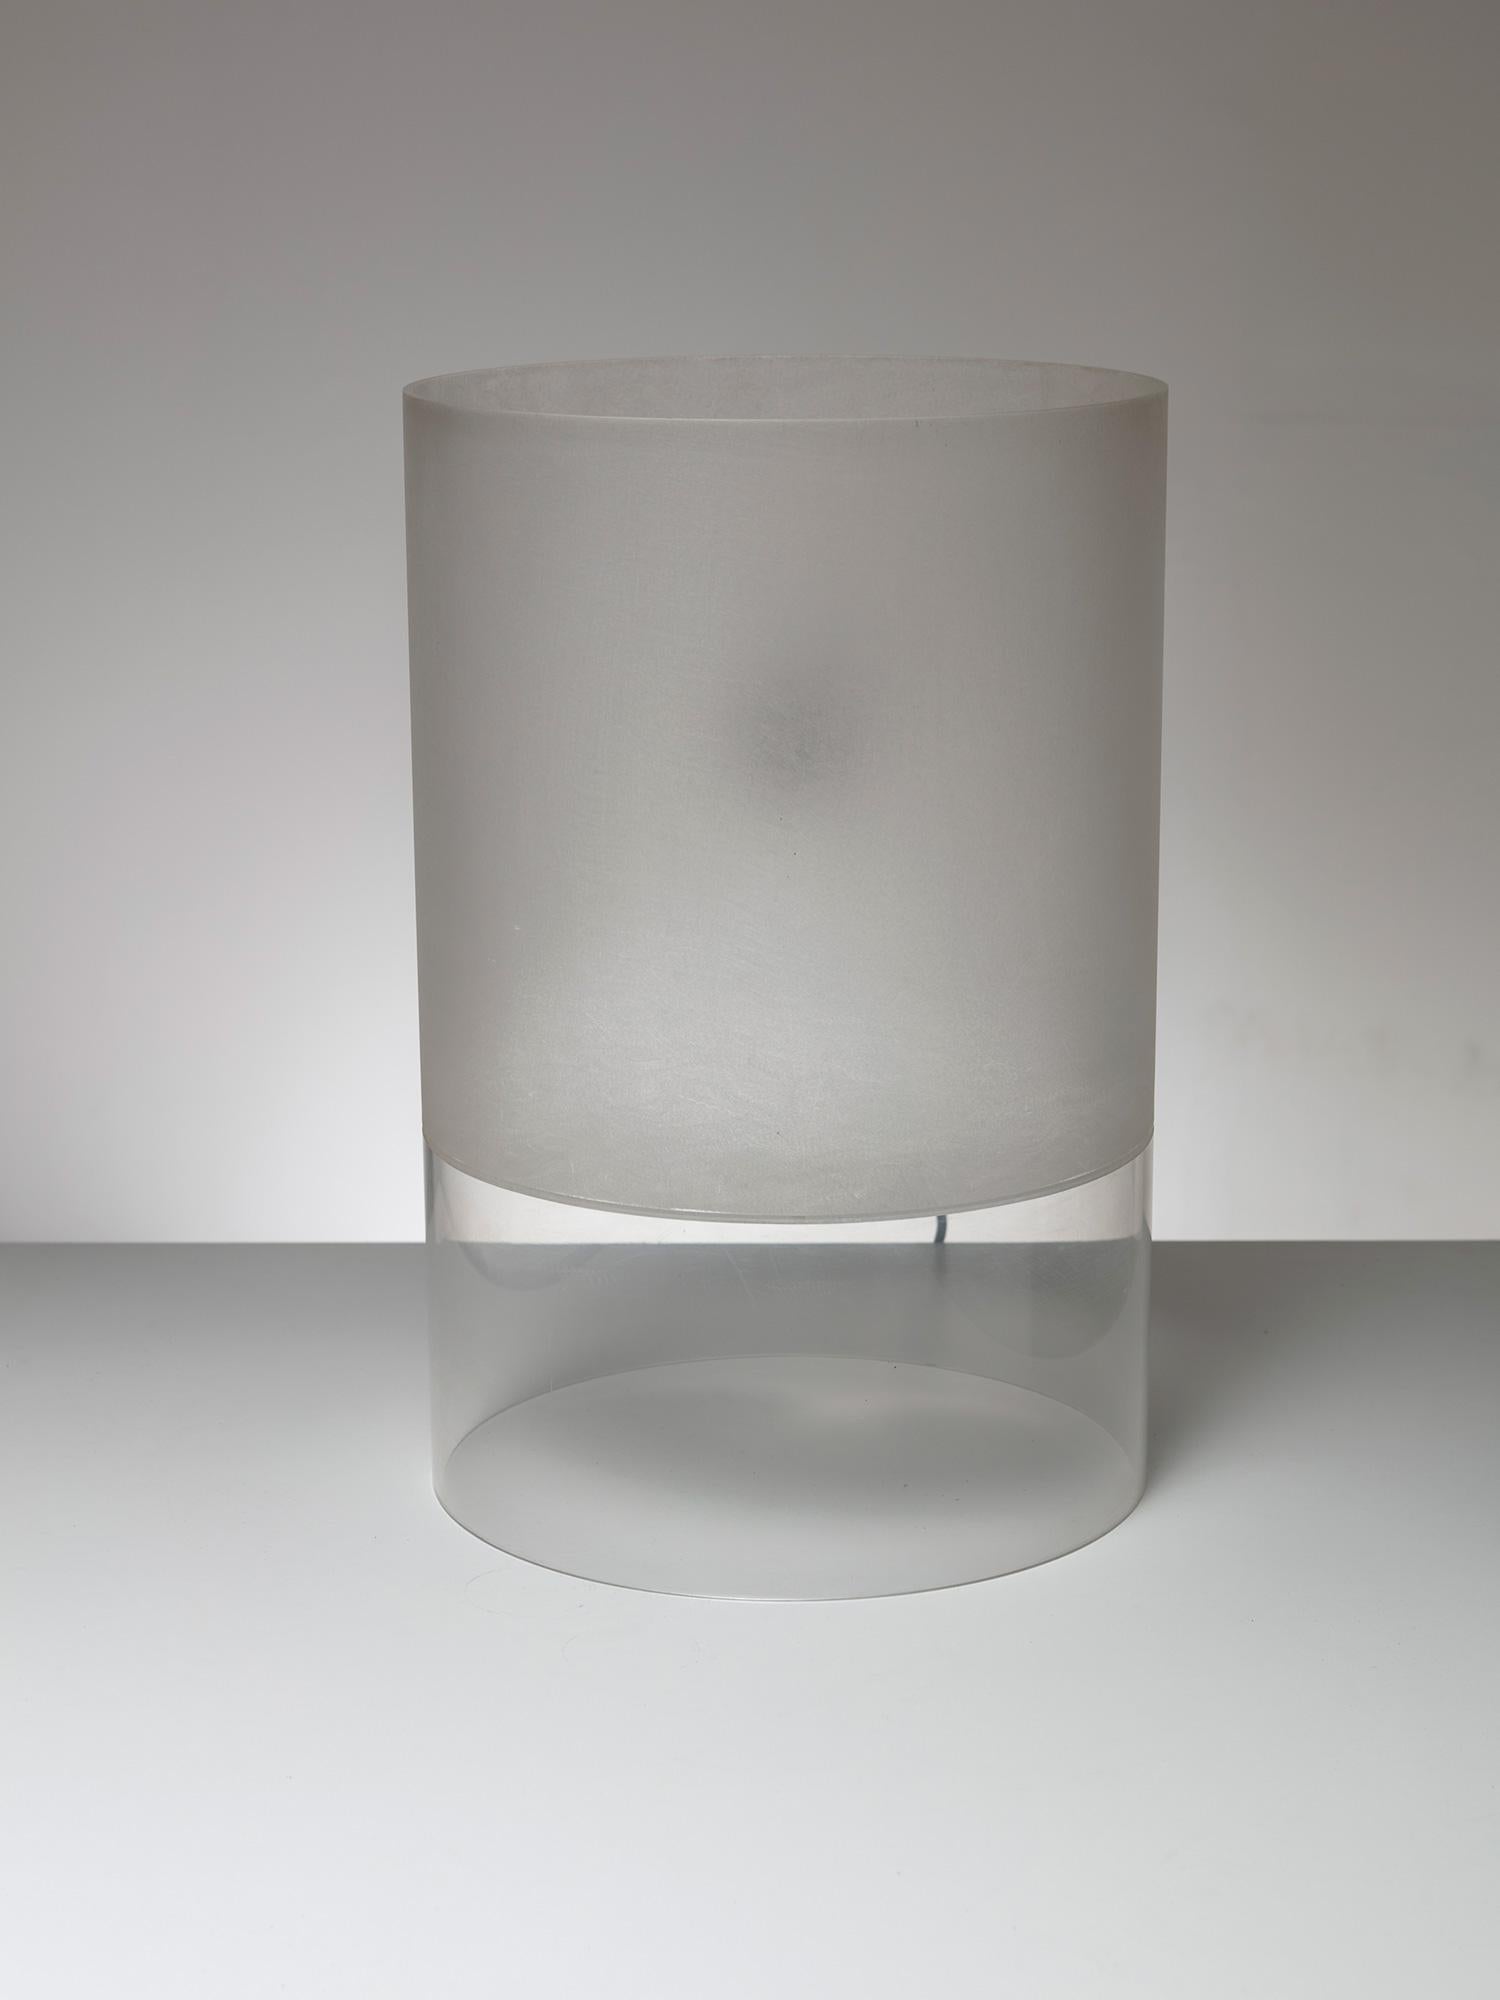 One-off Fatua table lamp by Guido Rosati
Totally composed by plexiglass cylinder with sandy part to enhance diffusion of the hidden light source.
This piece was presented by Rosati to Fontana Arte director to explain his new project, lately came